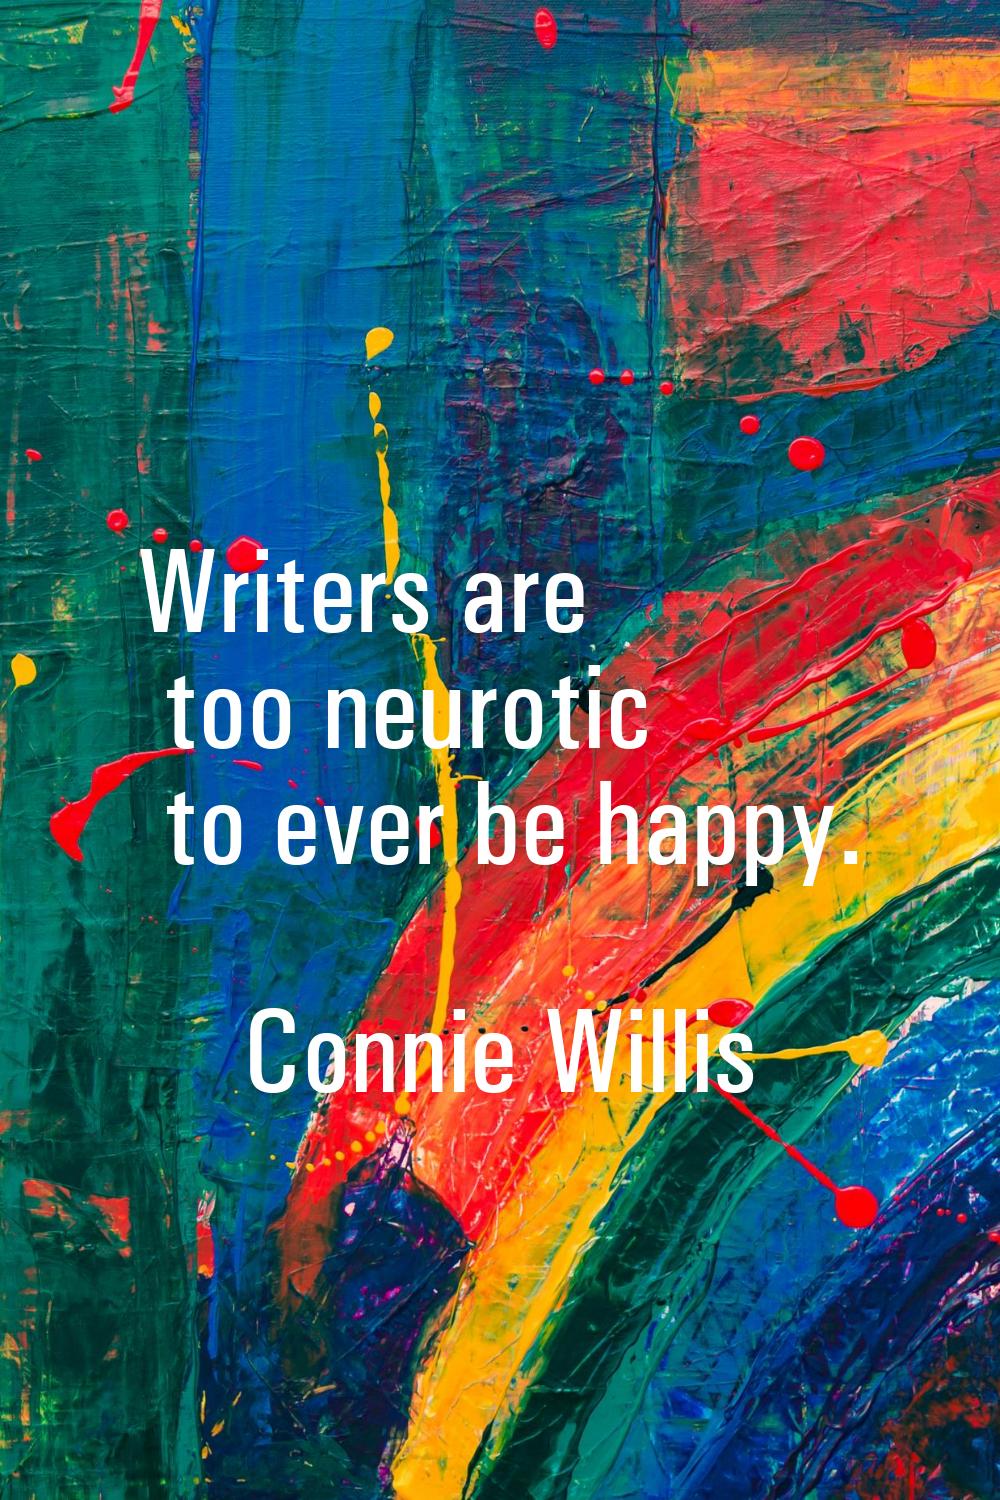 Writers are too neurotic to ever be happy.